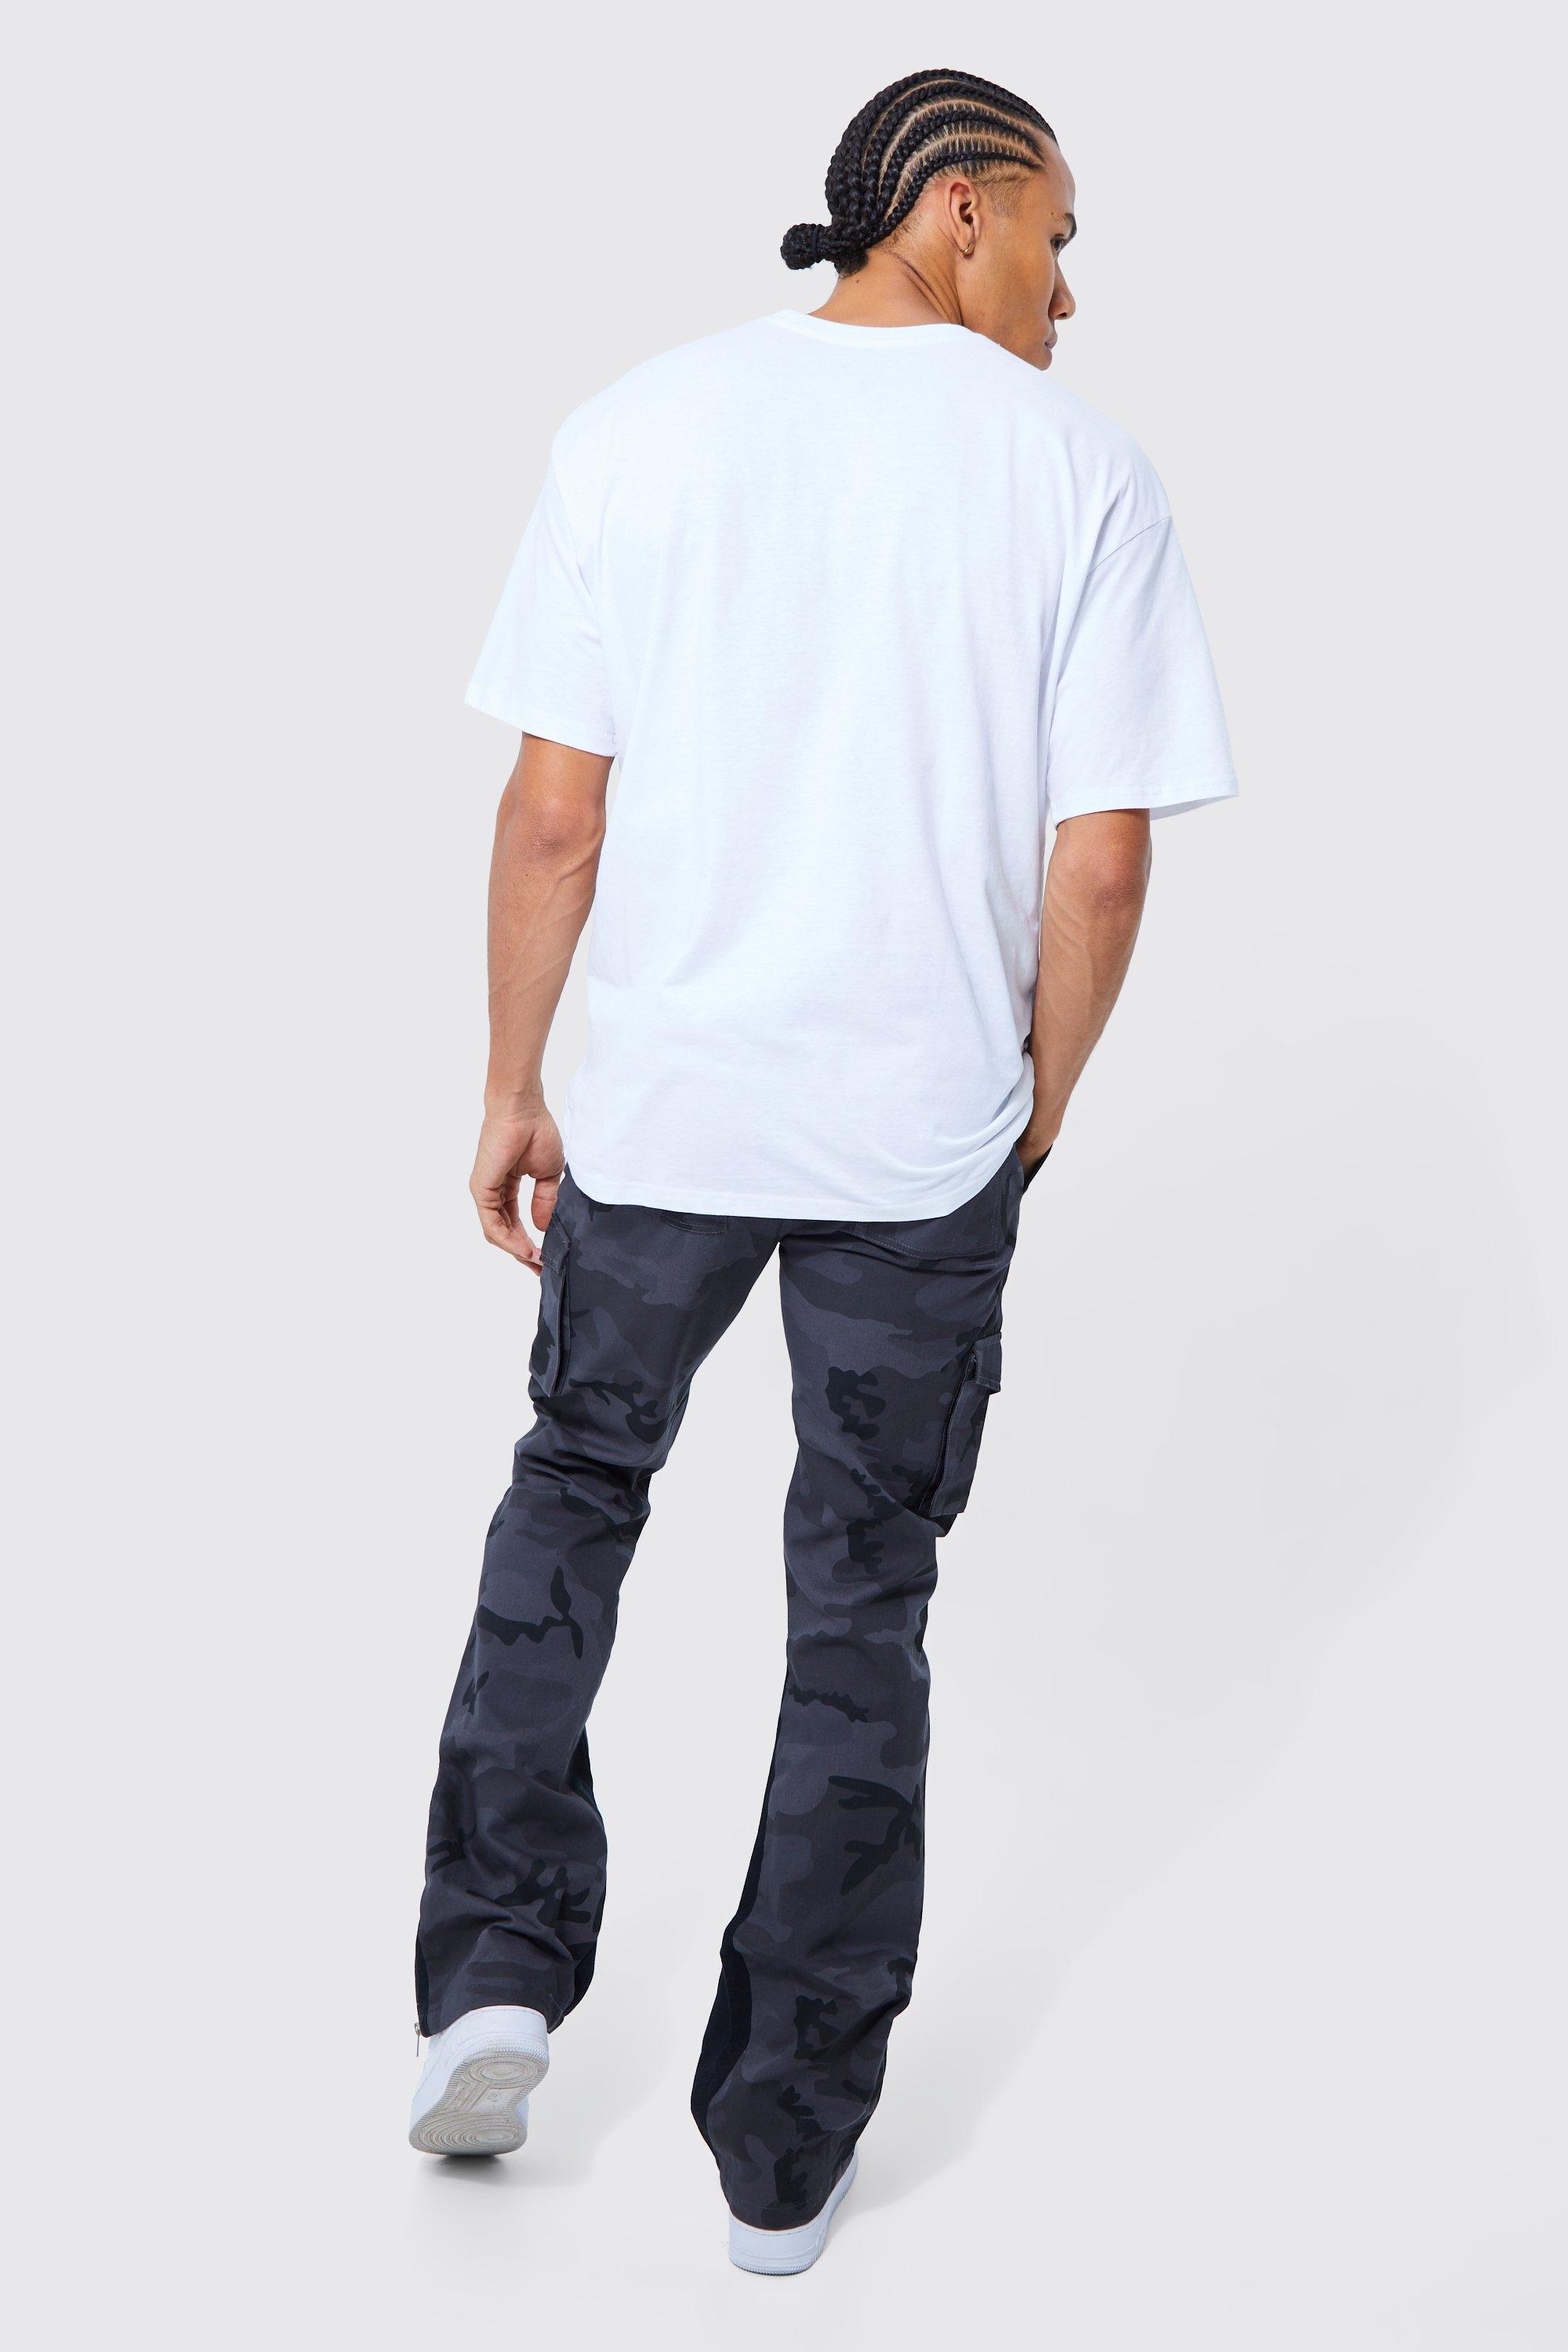 boohooMAN Men's Tall Fixed Relaxed Fit Cargo Pants